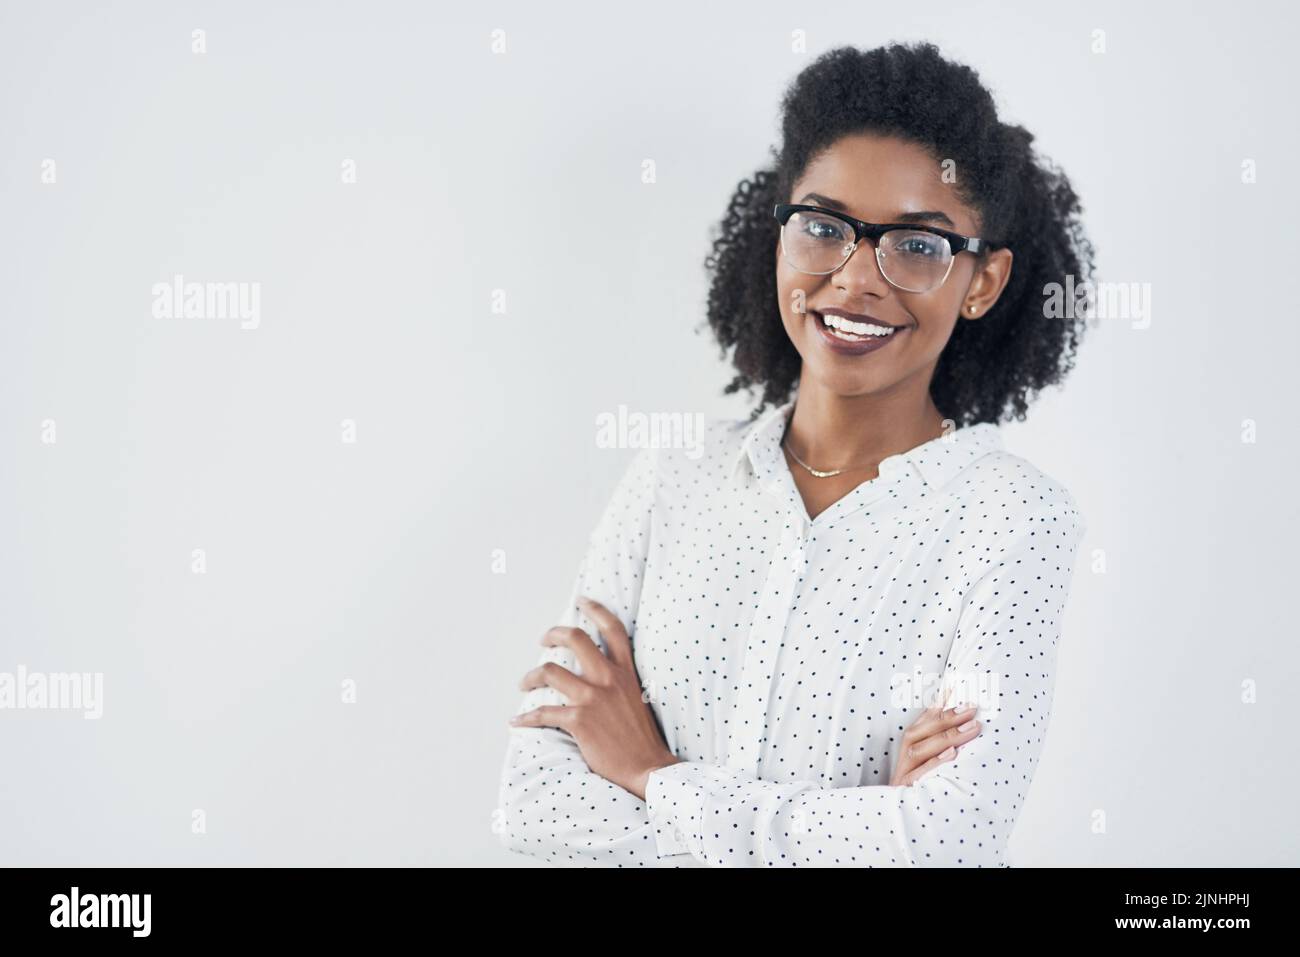 With confidence you can do anything. Studio shot of a confident young businesswoman against a gray background. Stock Photo